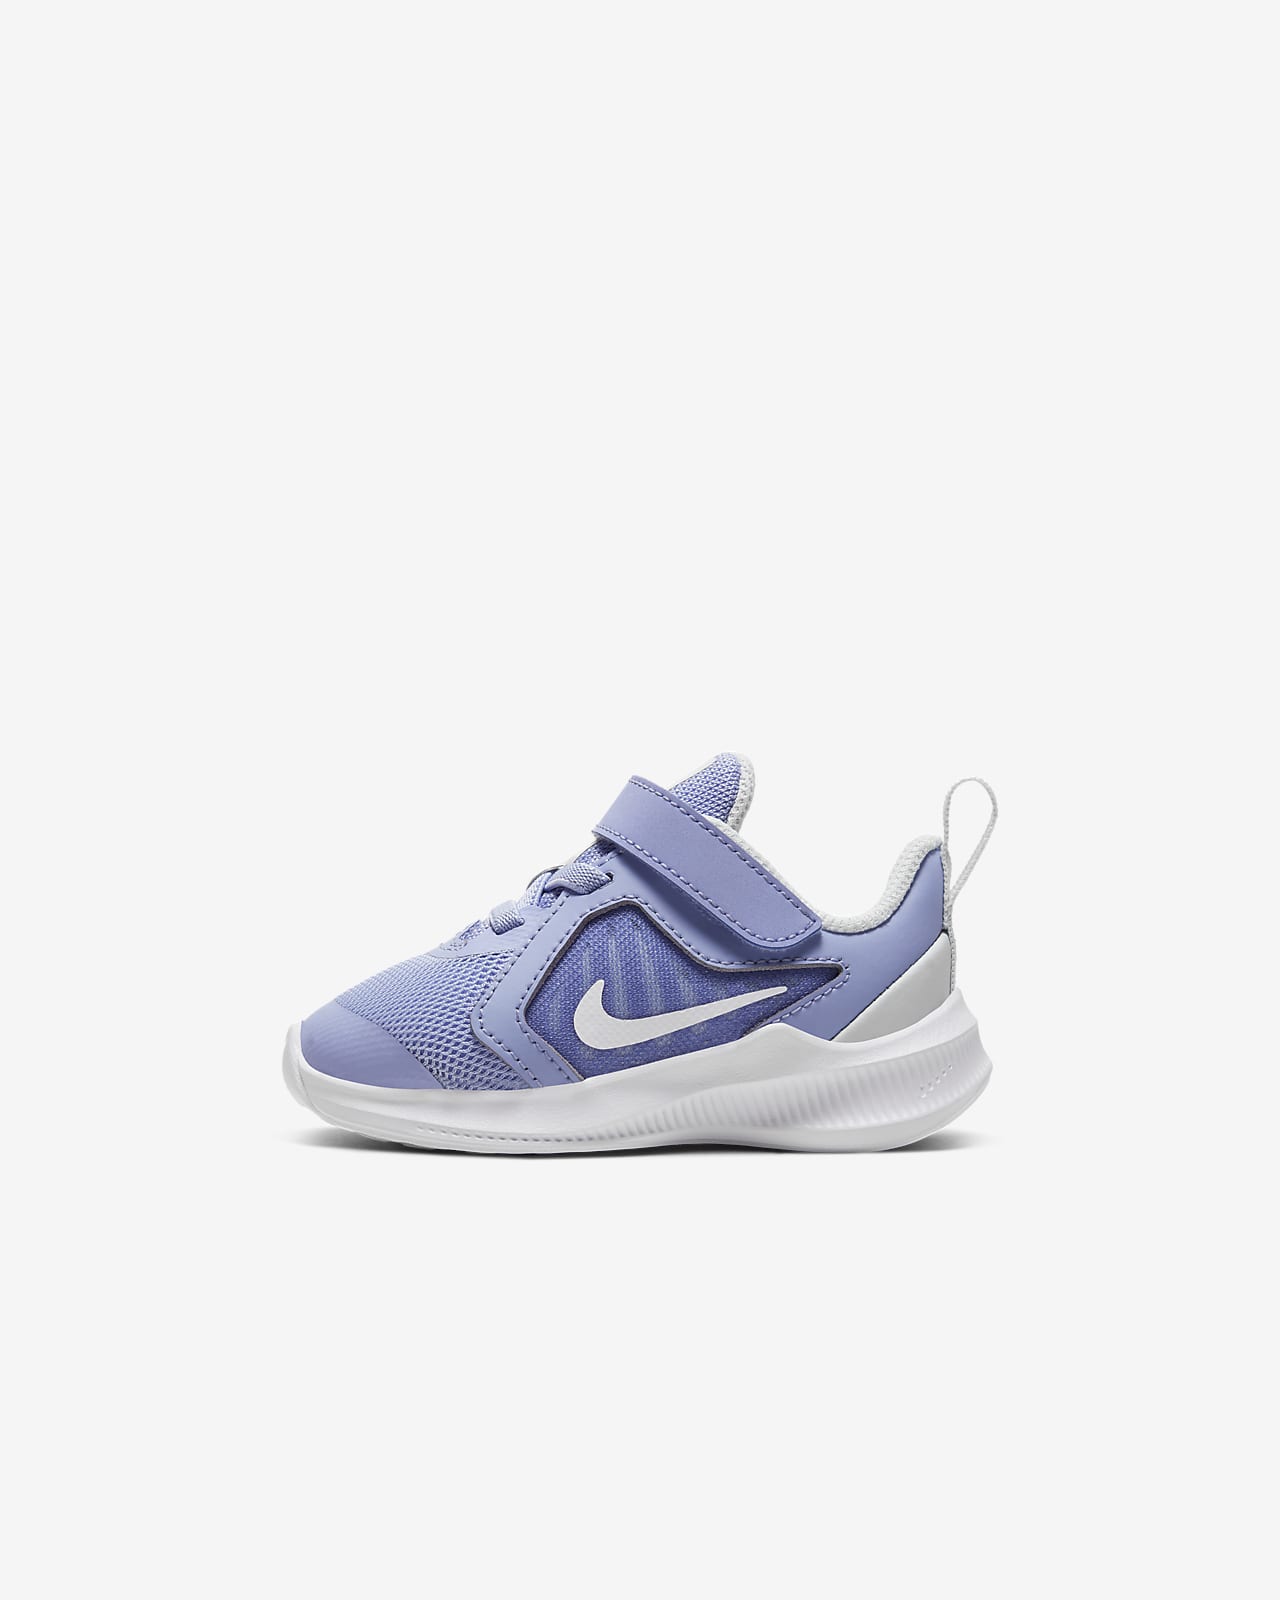 nike downshifter 7 baby